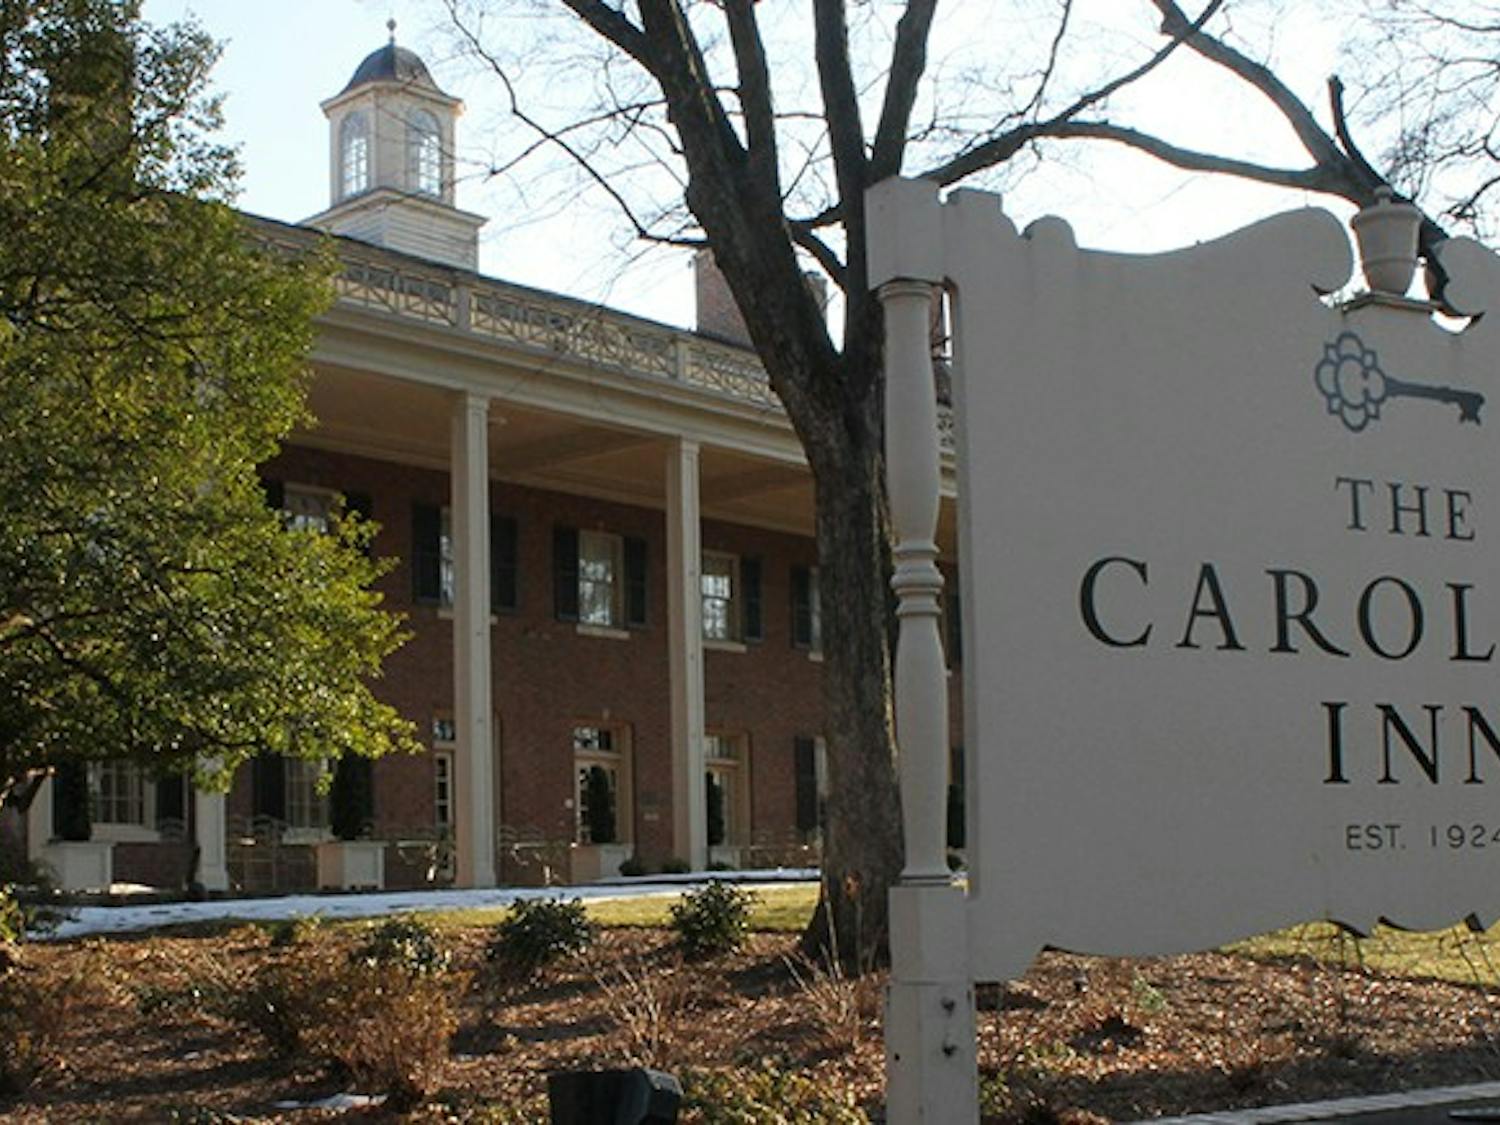 Popular hotels in the Chapel Hill area like the Carolina Inn and Franklin Hotel are booked to capacity for the rescheduled UNC vs Carolina basketball game on Thursday, February 20, 2014. Ticket holders face long wait lists and hotel referrals.